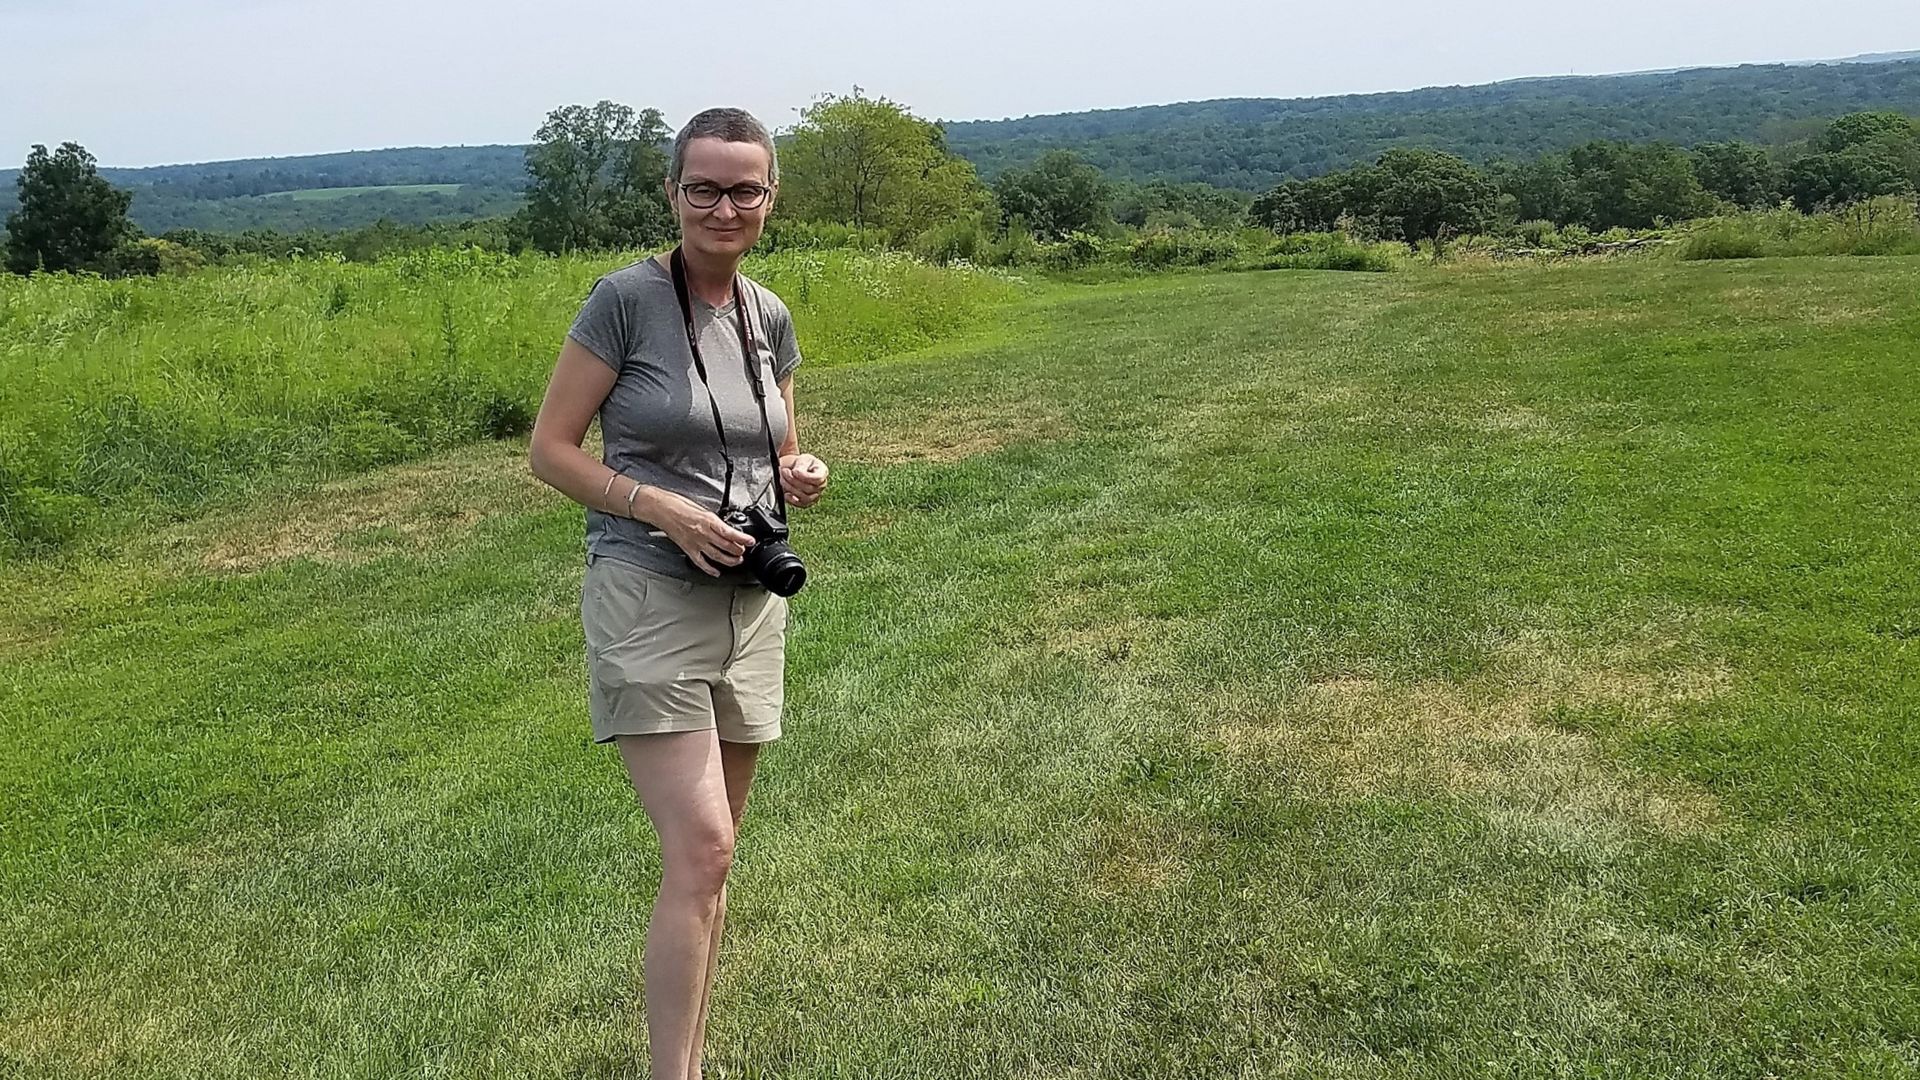 A woman stands in a green field on a sunny day, posing for a picture with a camera around her neck.